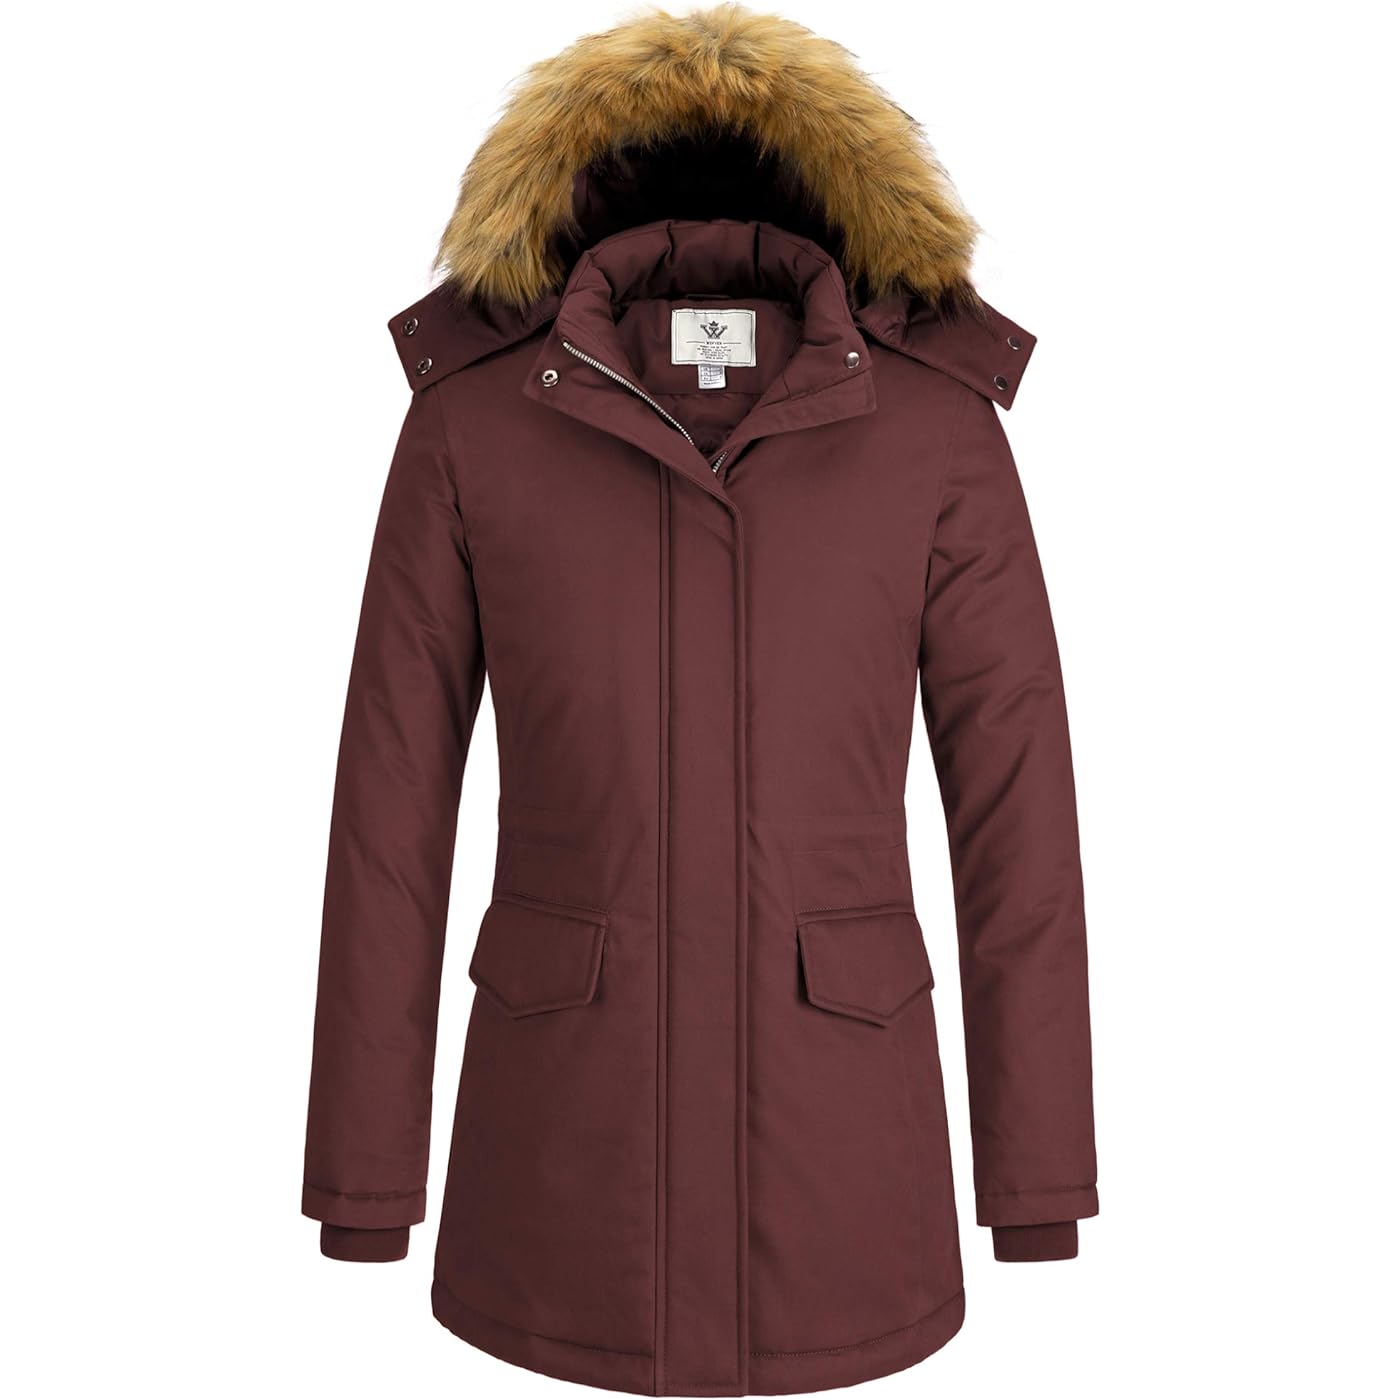 Куртка WenVen Winter Thickened Warm Mid Length Windproof and Waterproof With a Detachable Fur Hat, бордовый цена и фото